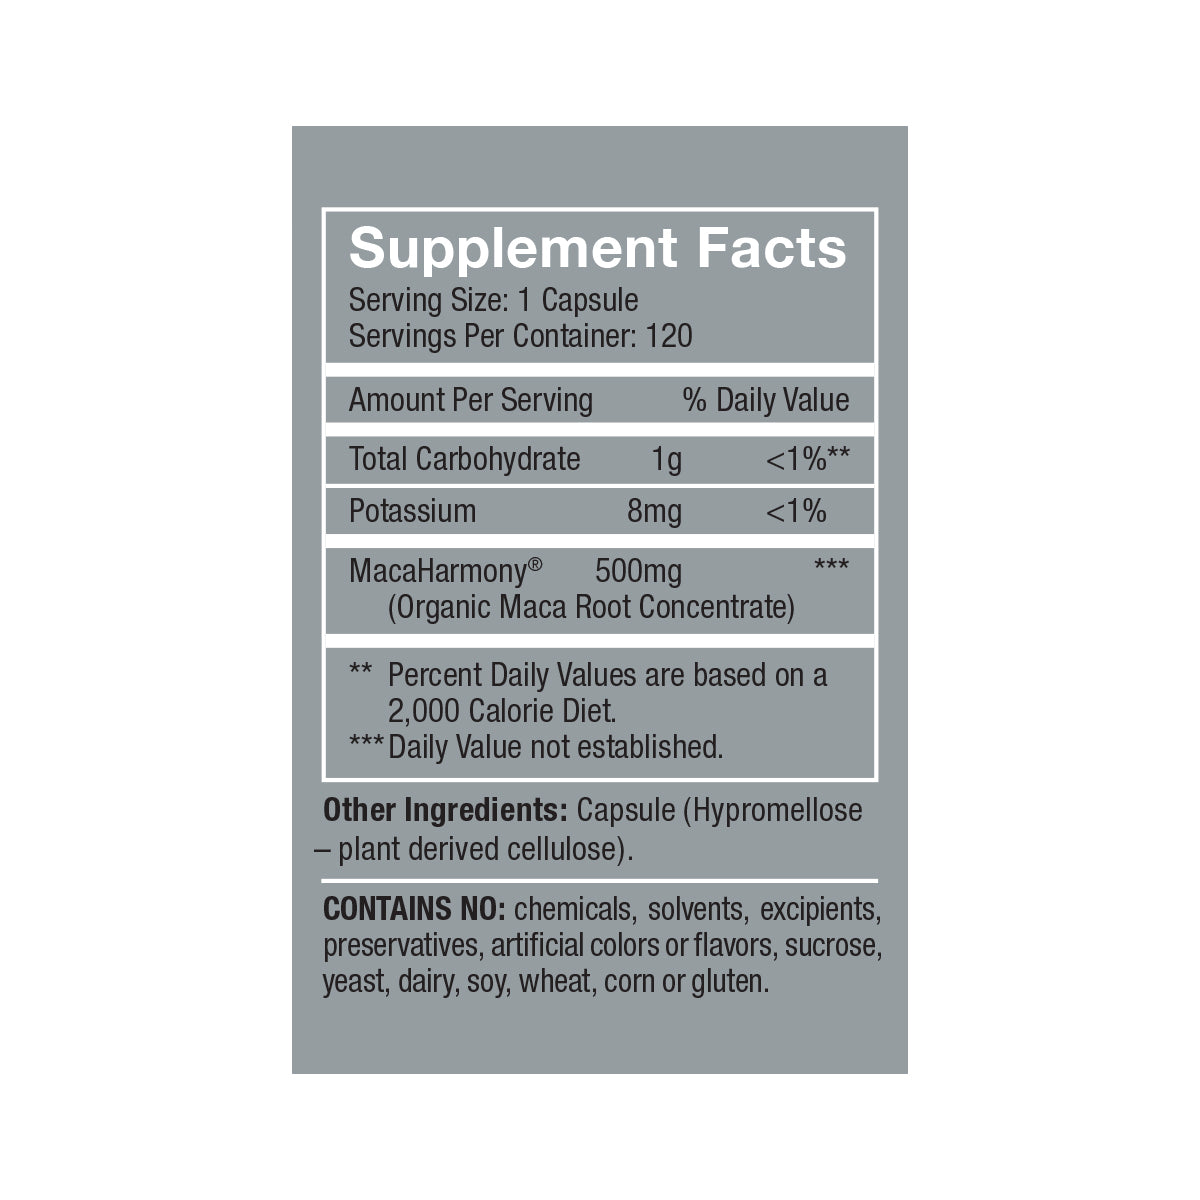 Femmenessence MacaHarmony<br>For Reproductive Health side panel product box supplement facts, white/black text on dark gray background: Serving size 1 capsule, servings per container 120, total carbohydrate, potassium, MacaHarmony, other ingredient is capsule (hypromellose - plant derived cellulose), contains no chemicals, solvents, excipients, preservatives, artificual colors or flavors, sucrose, yeast, dairy, soy, wheat, corn or gluten